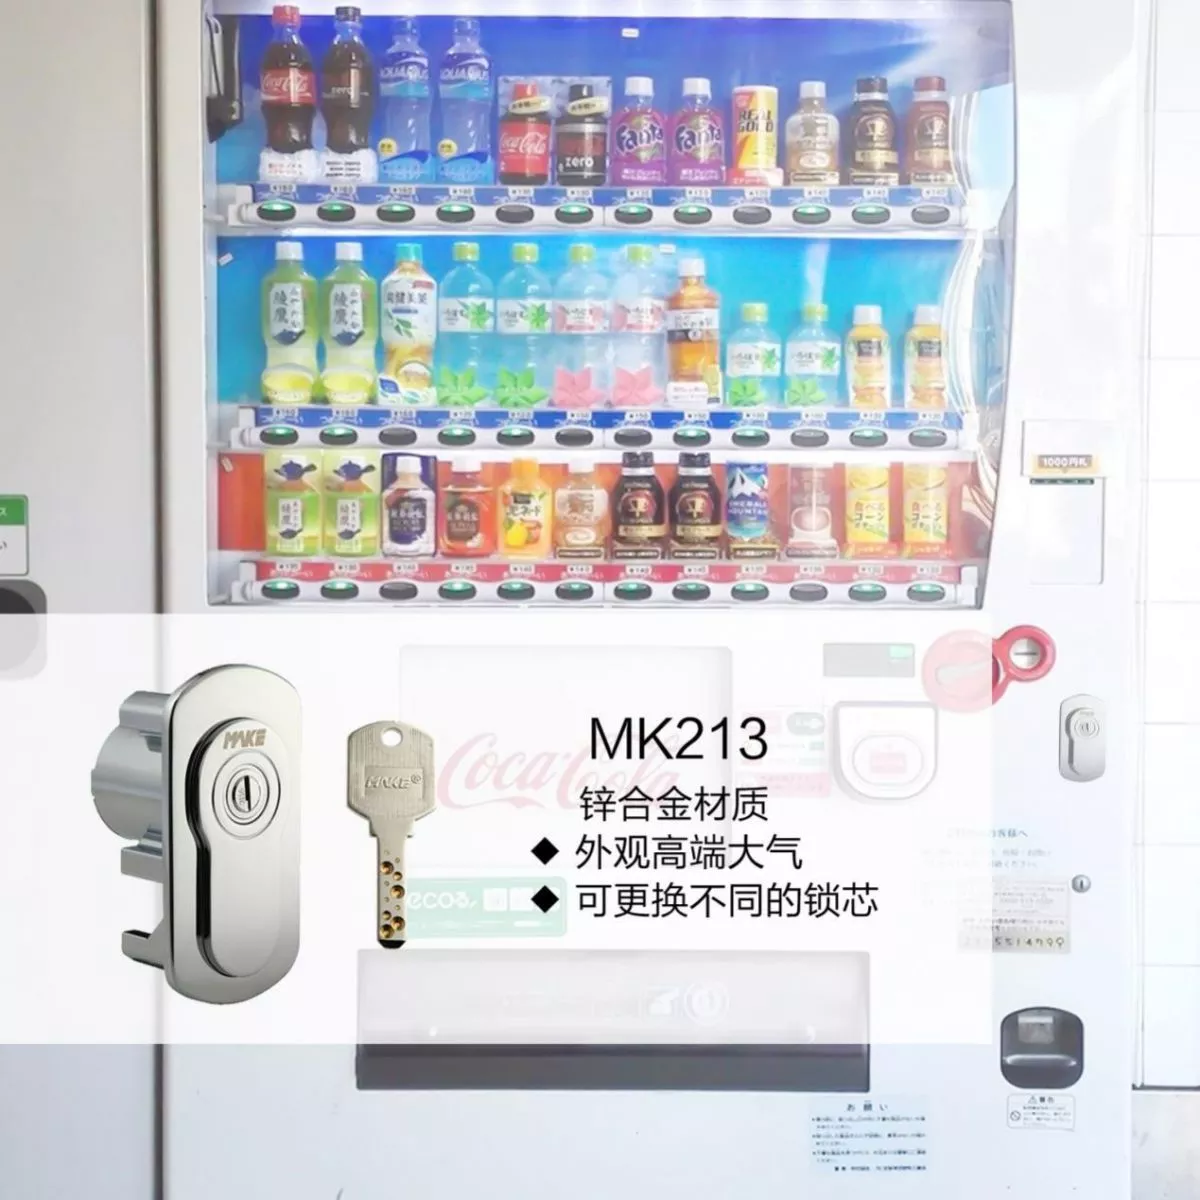 Pick the most reassuring lock for your vending machine